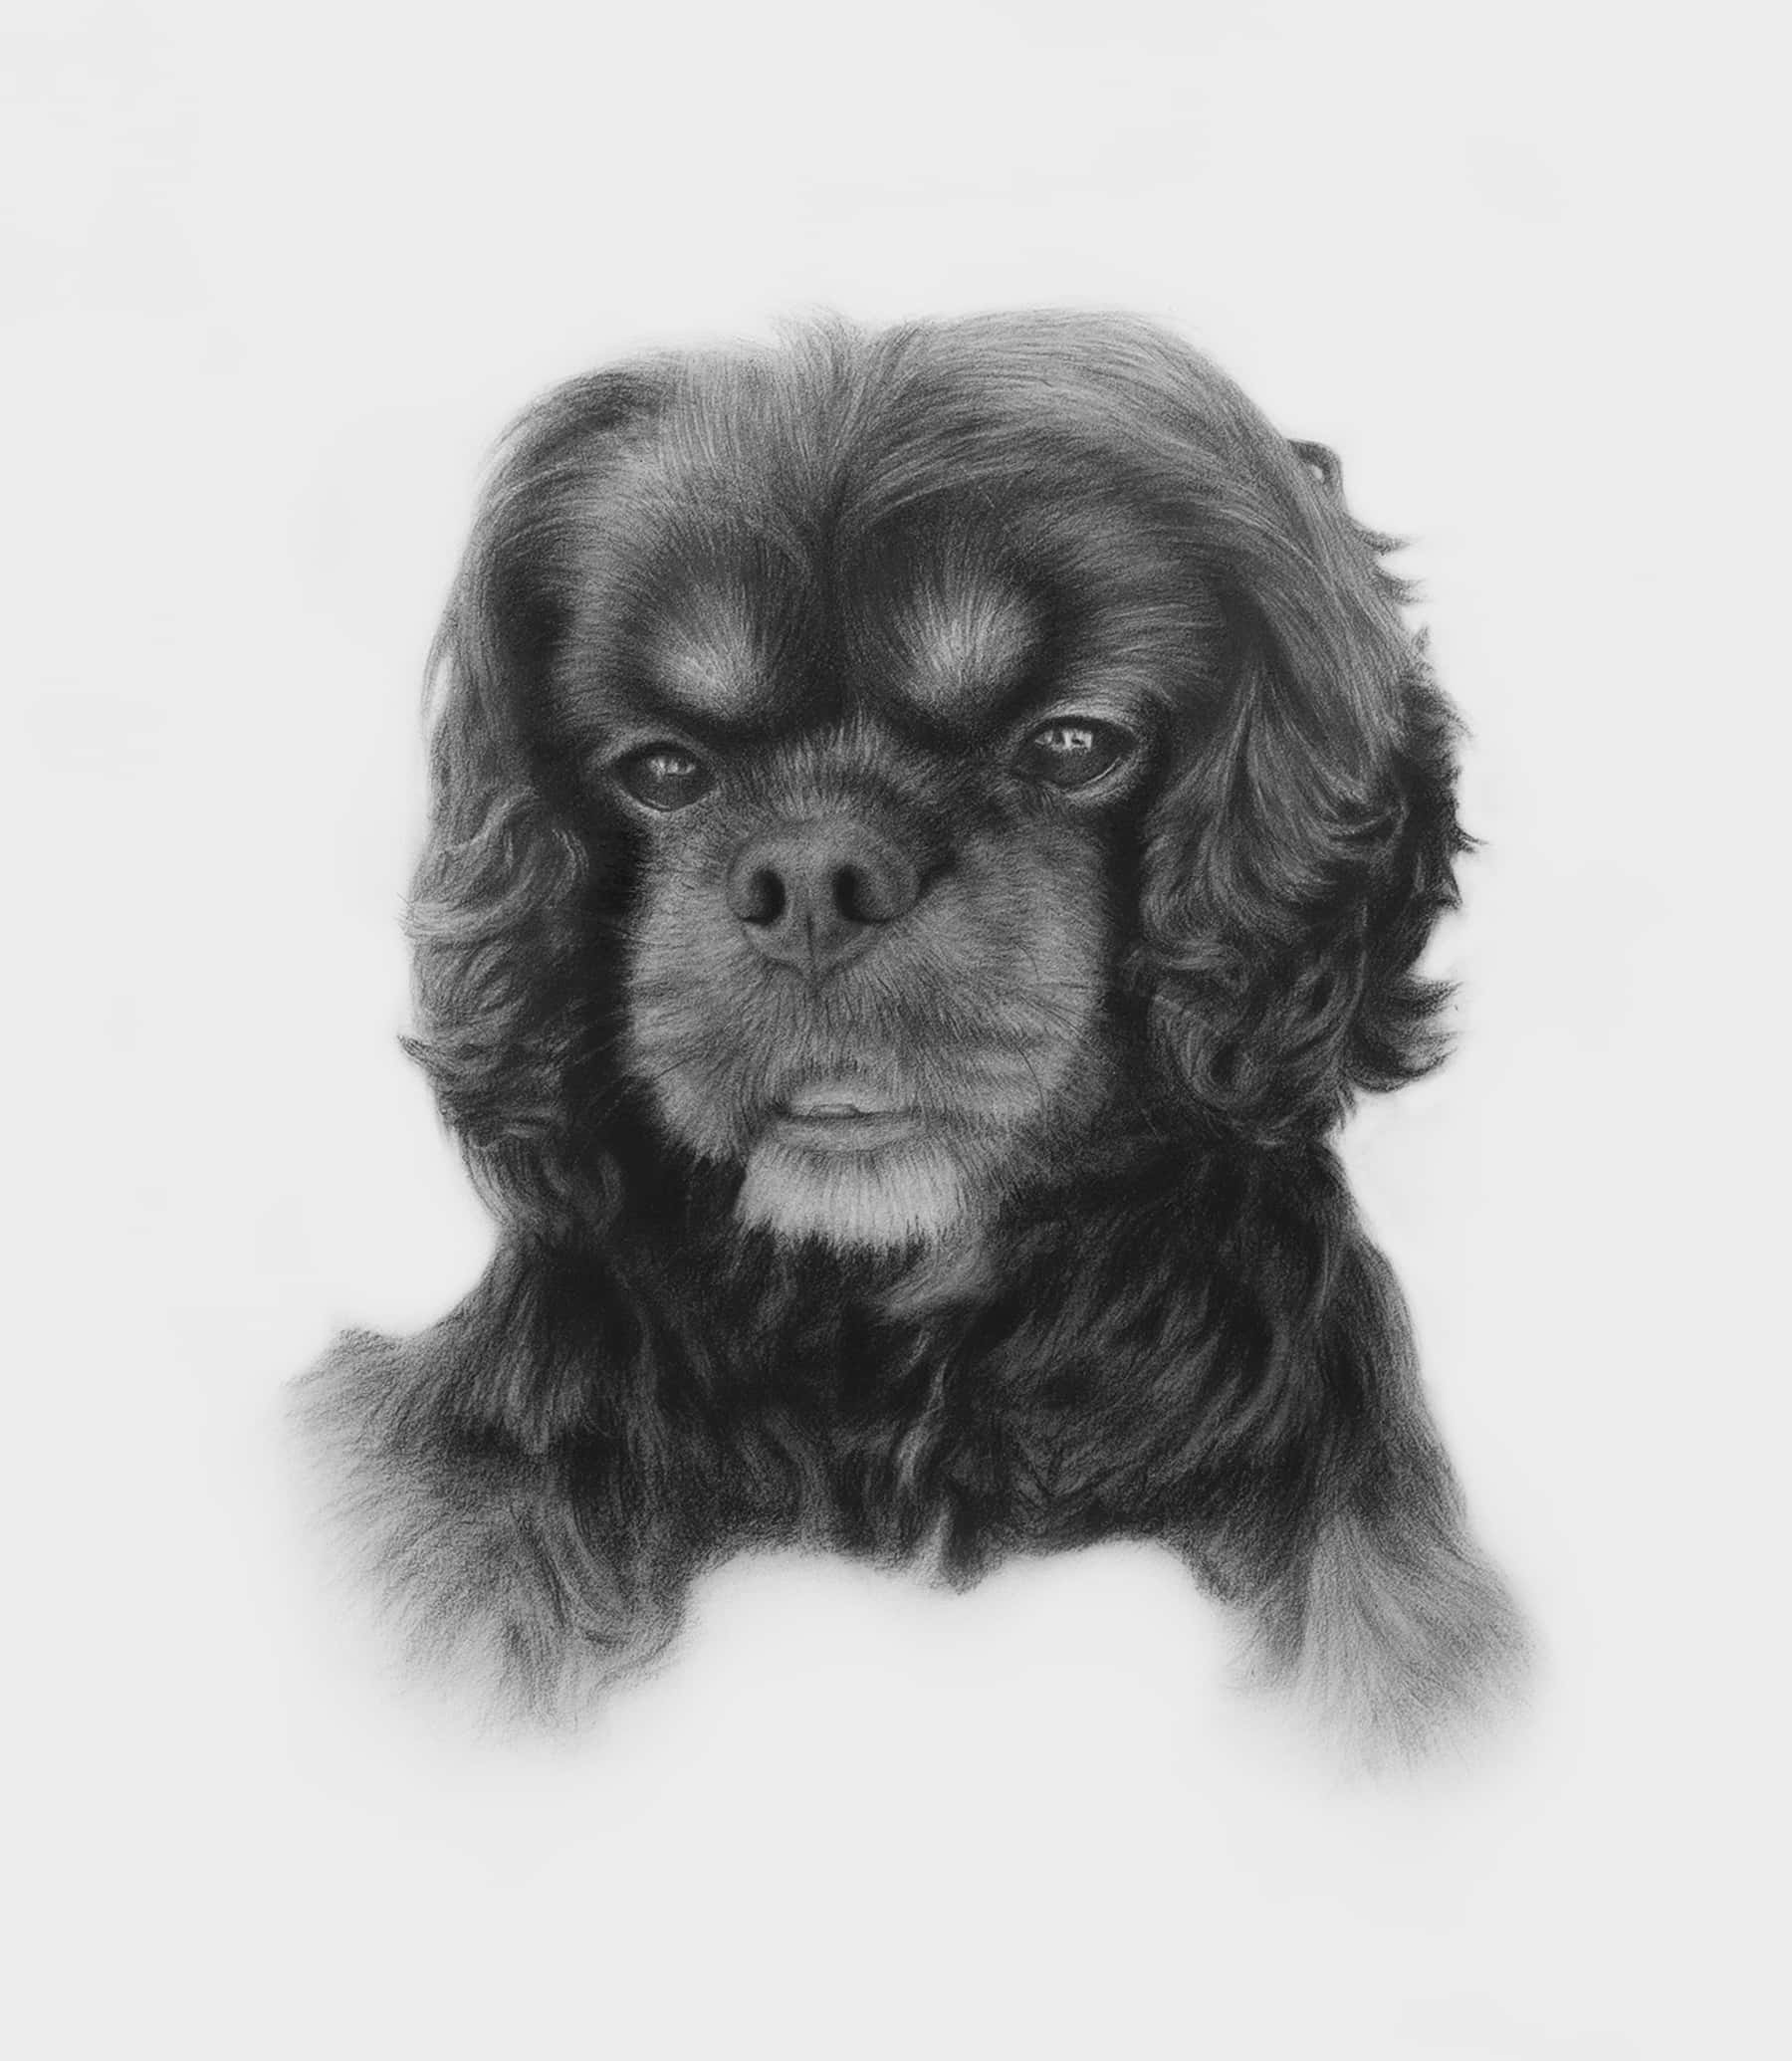 A detailed grayscale pencil portrait of a dog, made from photo, likely a Cavalier King Charles Spaniel, facing forward. The dog has intricate fur texture, floppy ears, large expressive eyes, and a slightly open mouth, giving it a lifelike and thoughtful expression.